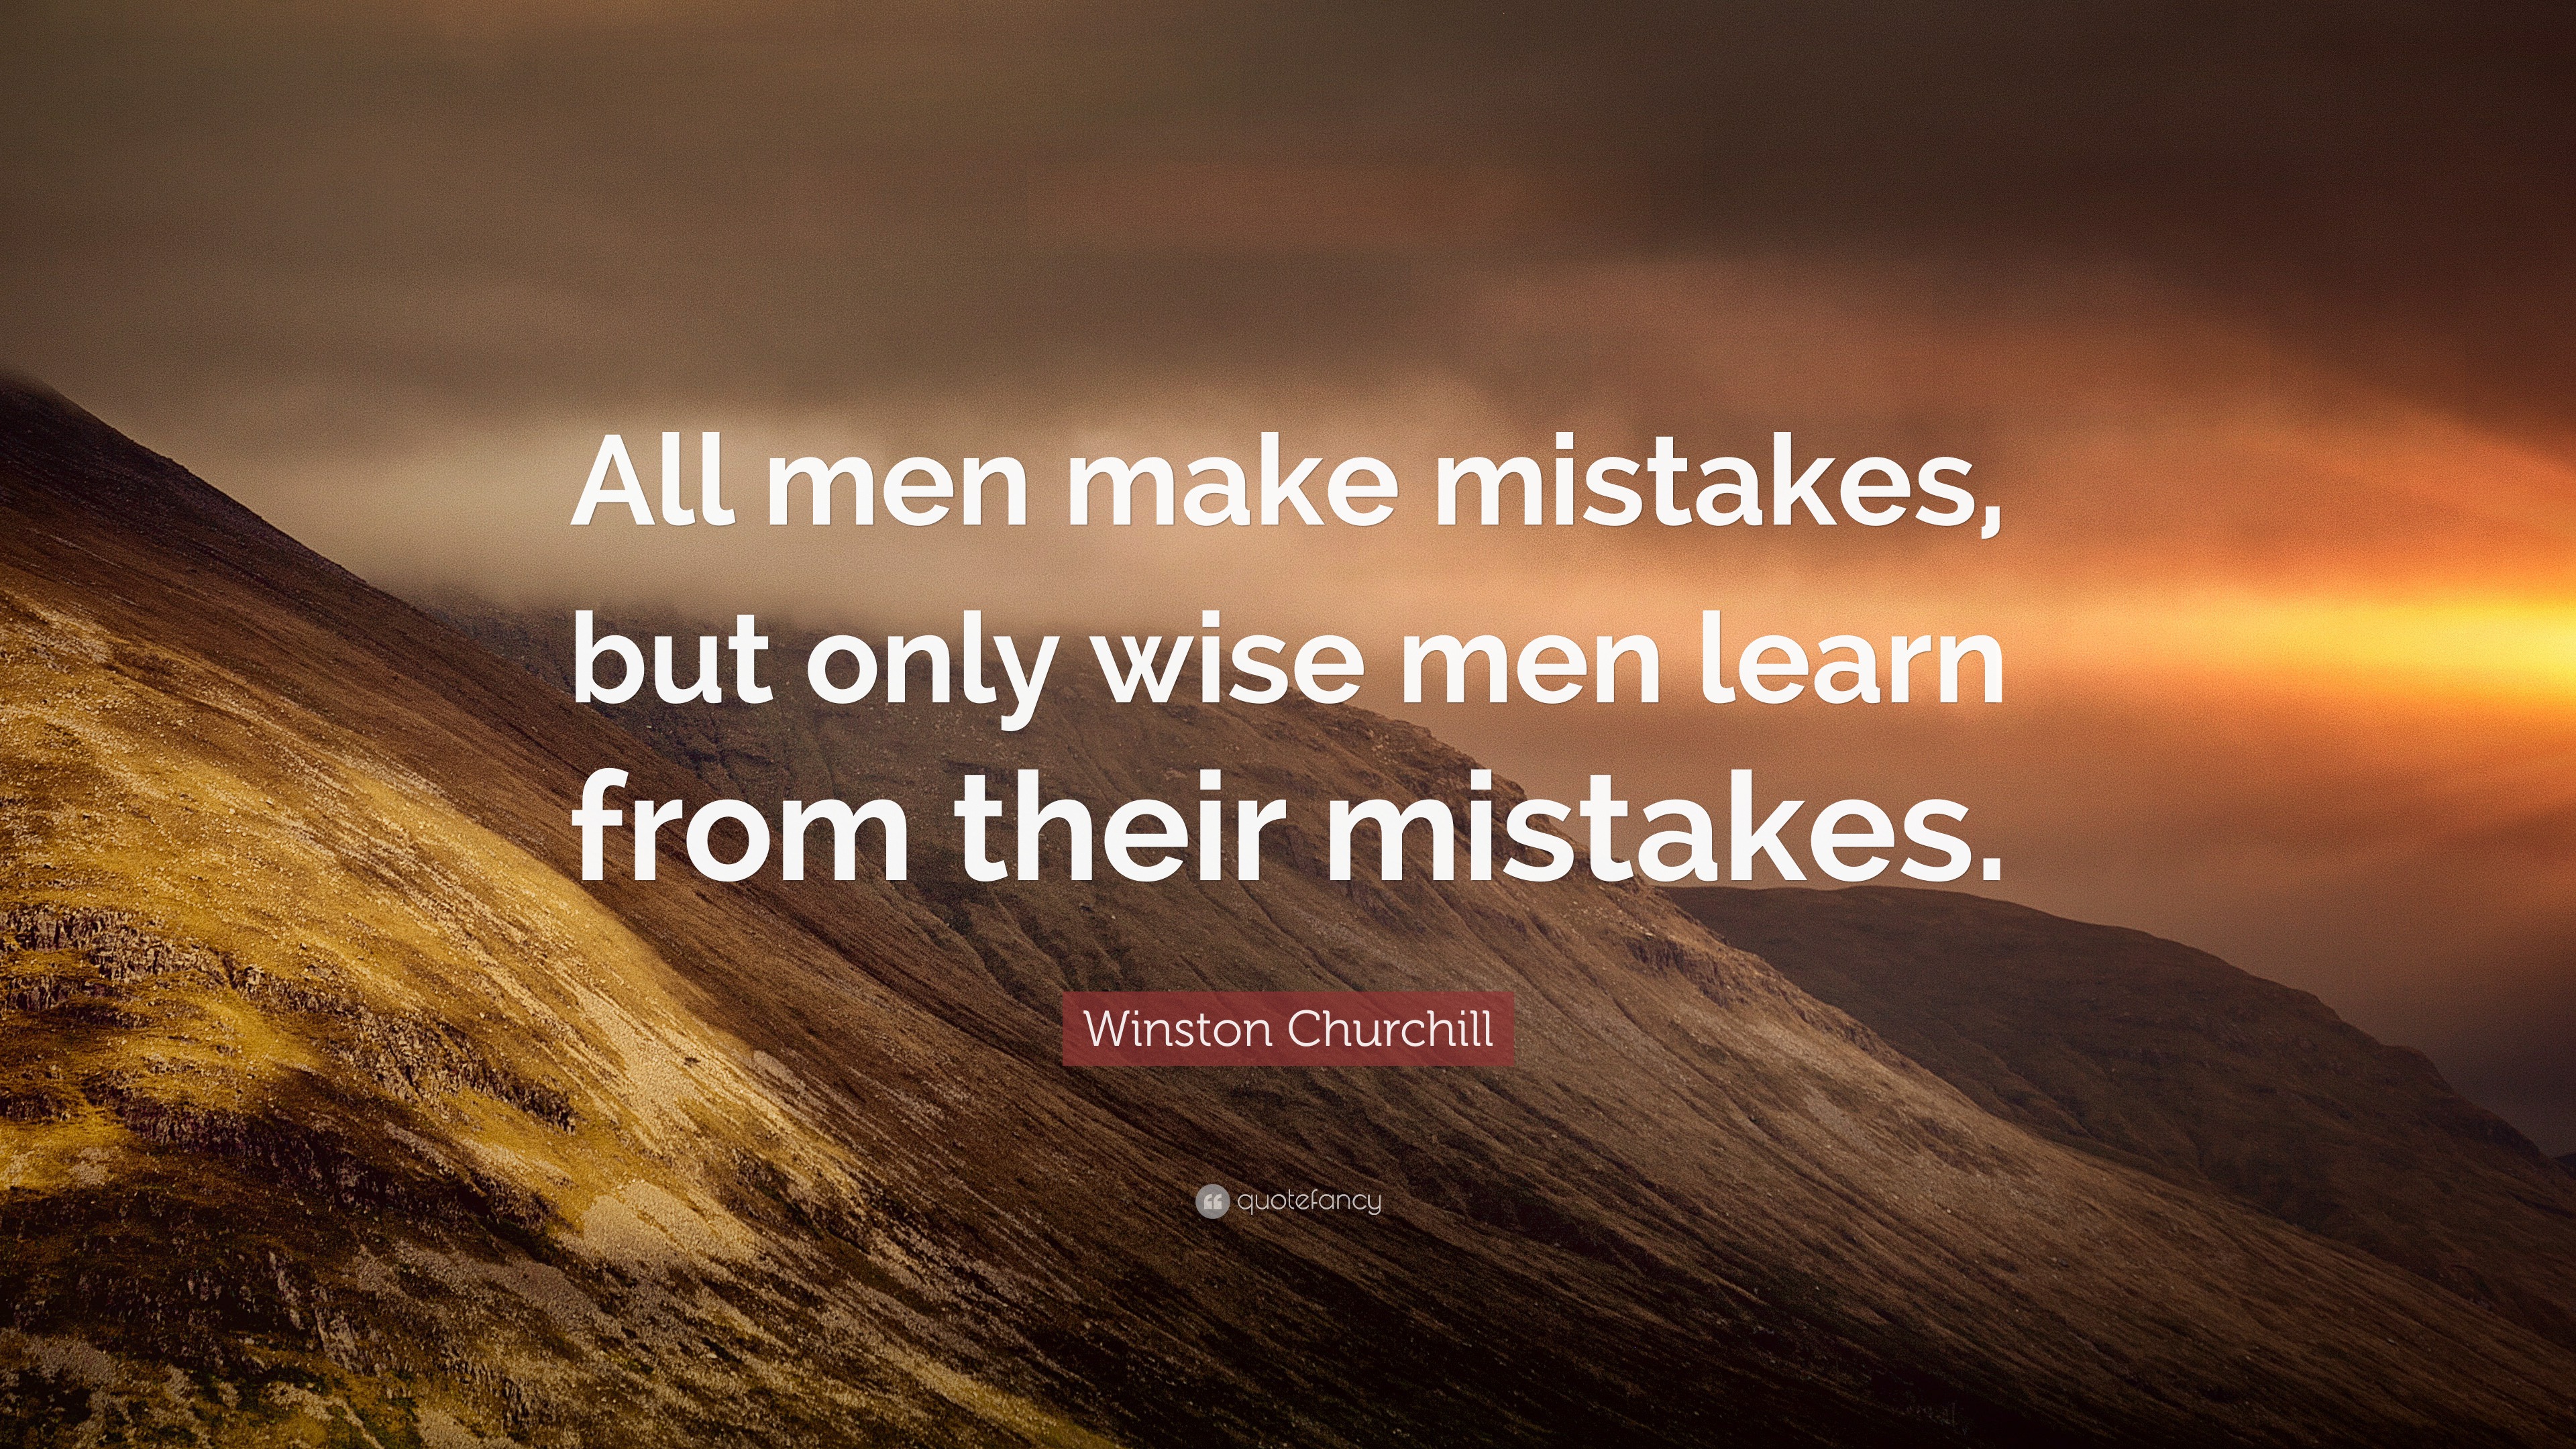 Winston Churchill Quote: “All men make mistakes, but only wise men